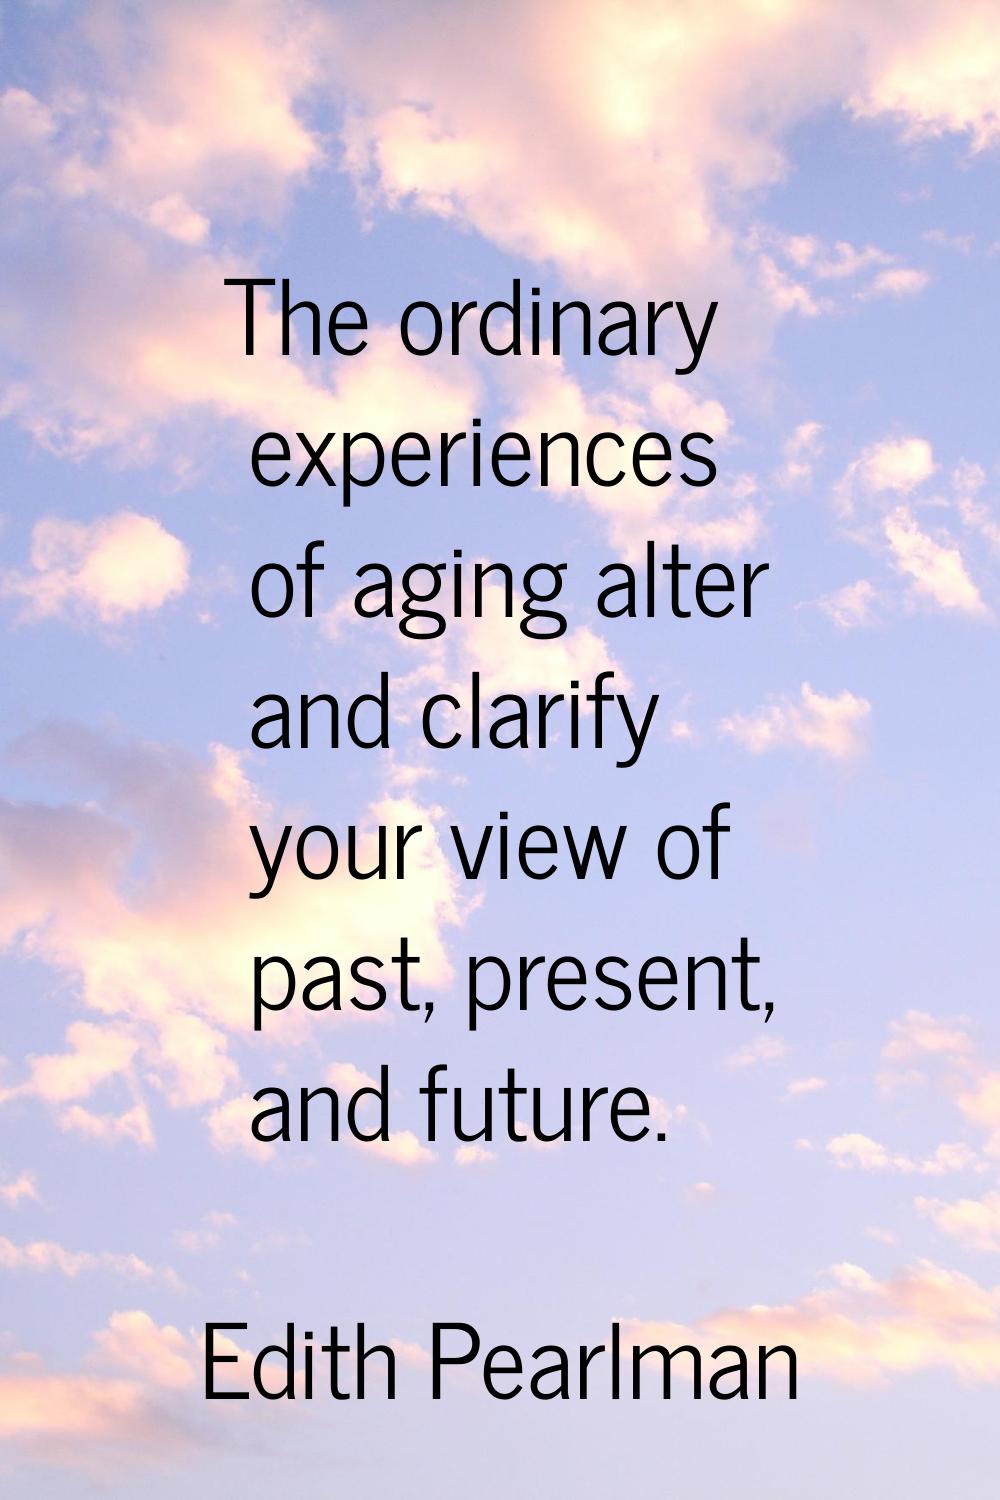 The ordinary experiences of aging alter and clarify your view of past, present, and future.